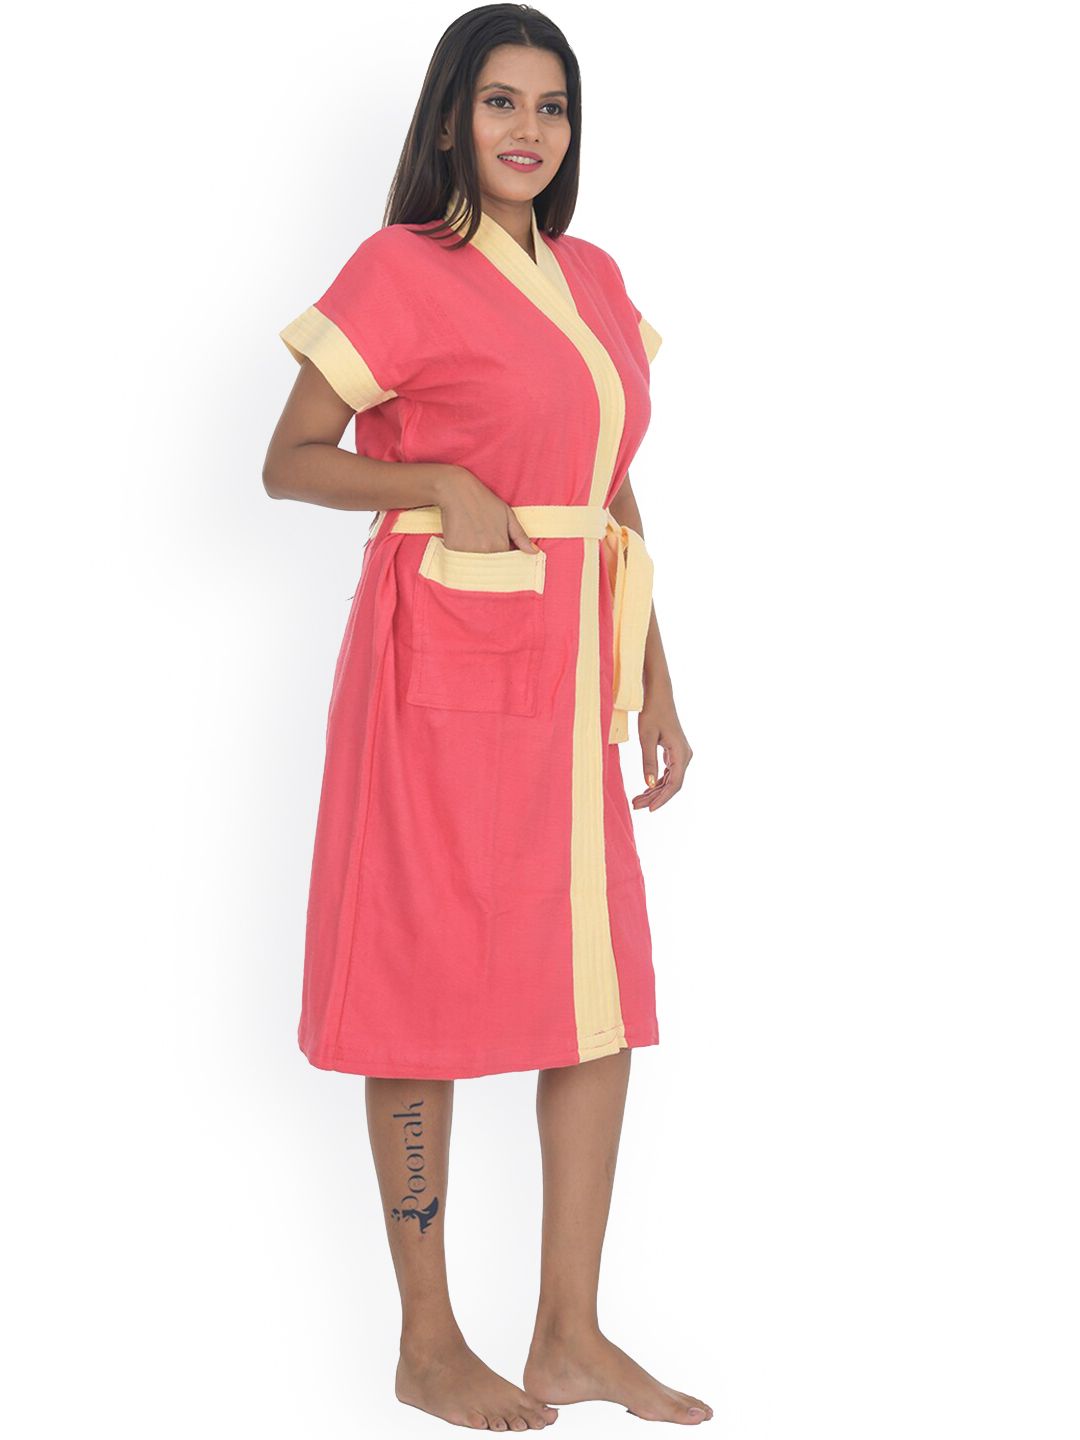 POORAK Women Yellow Strip Pink-Colored Half Sleeves Soft Terry Cotton Bath Robe Price in India